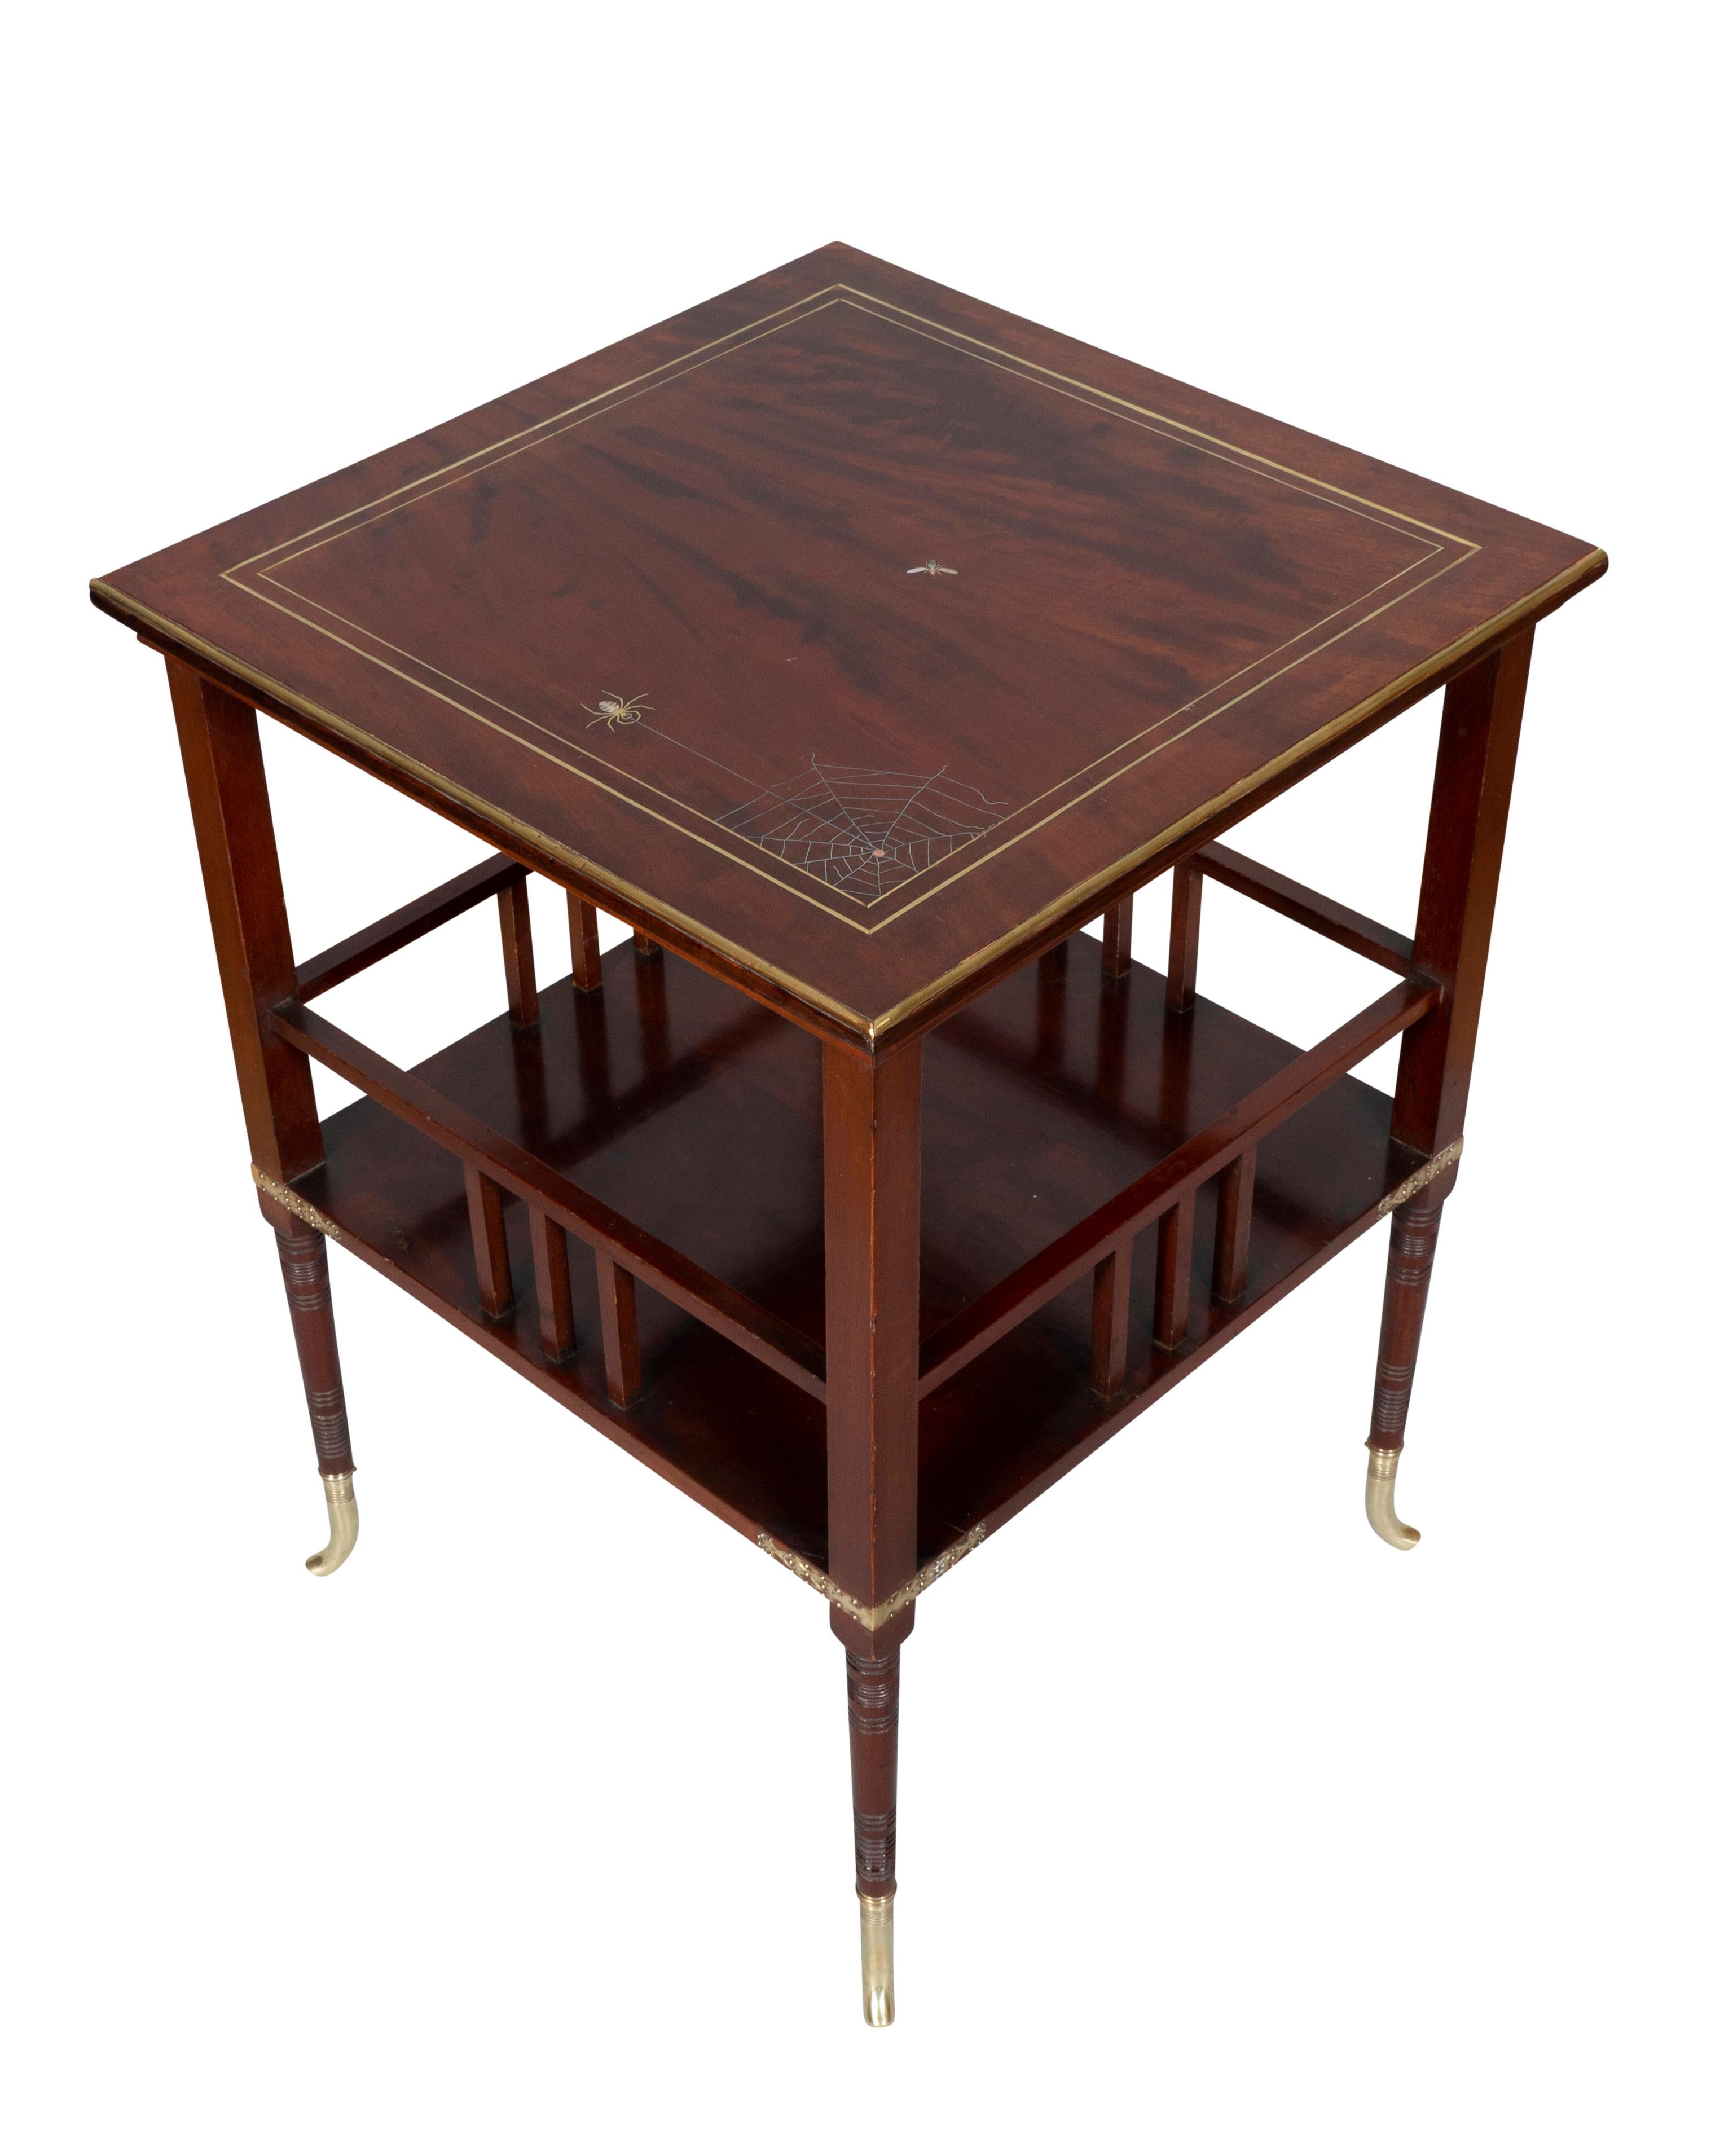 Late 19th Century American Aesthetic Mahogany and Mother of Pearl Table by A&H Lejambre For Sale